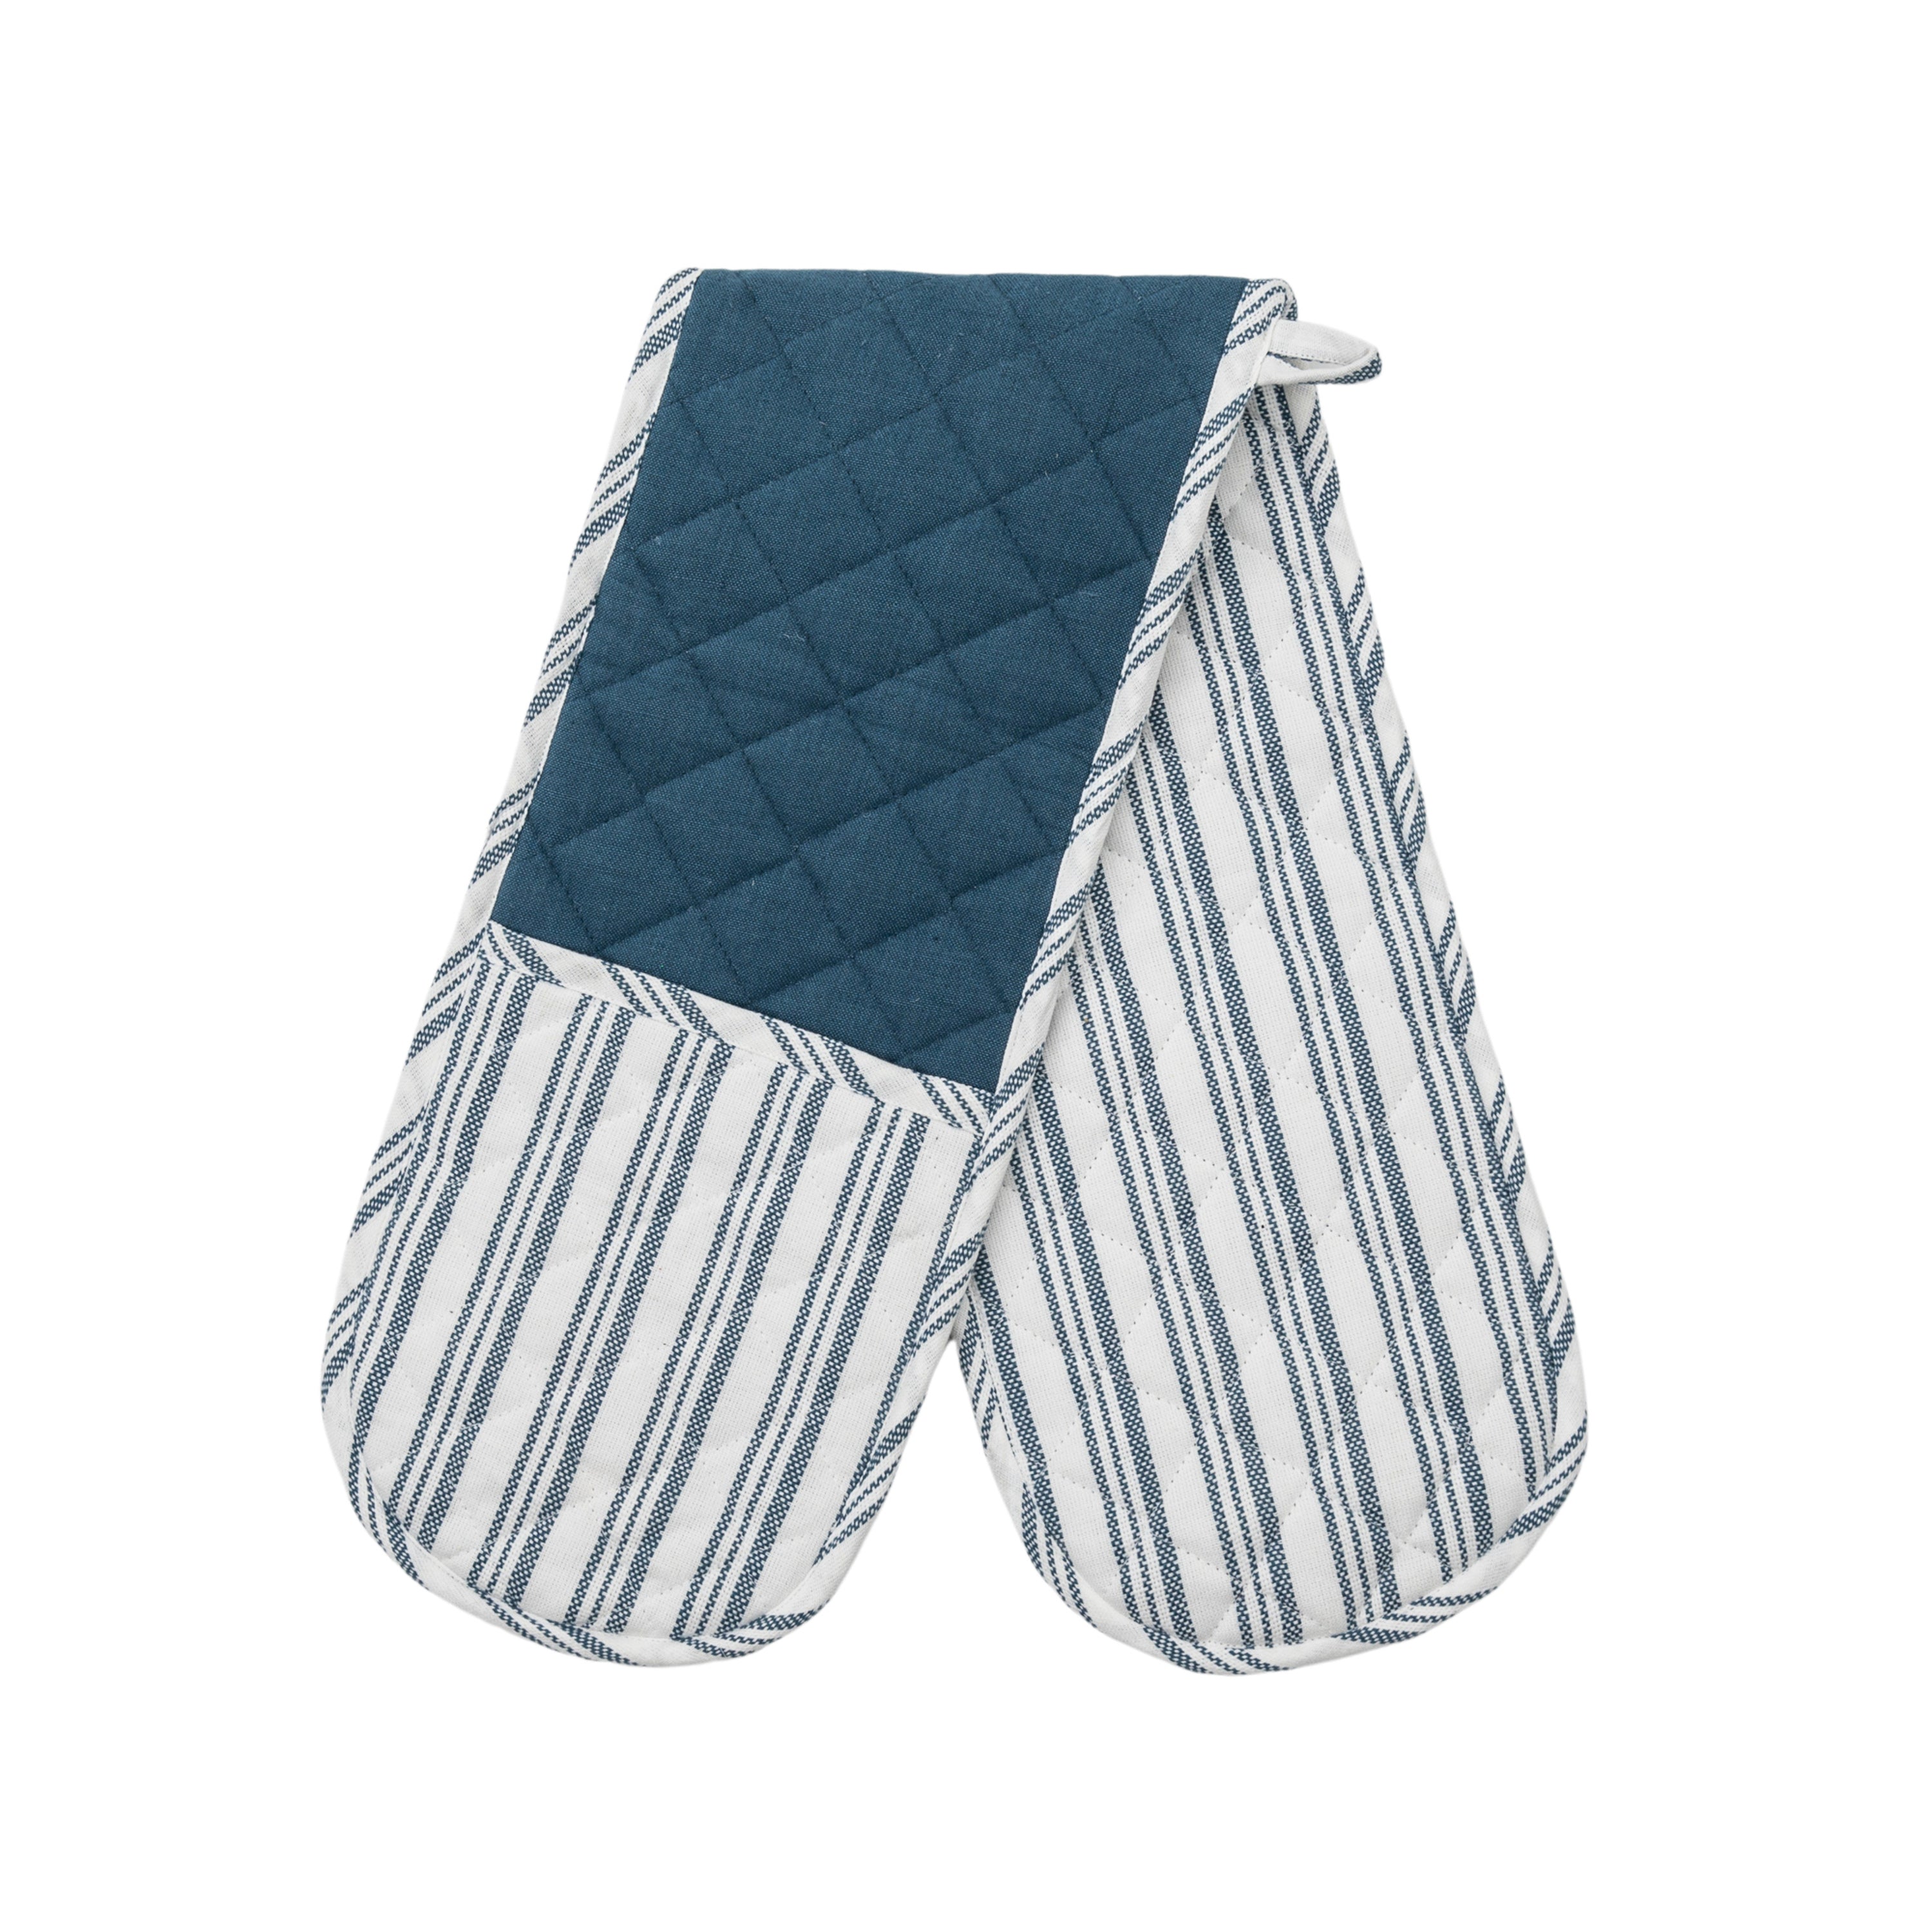 Organic Cotton Stripe Double Oven Glove in Blue | Low Cost Delivery ...